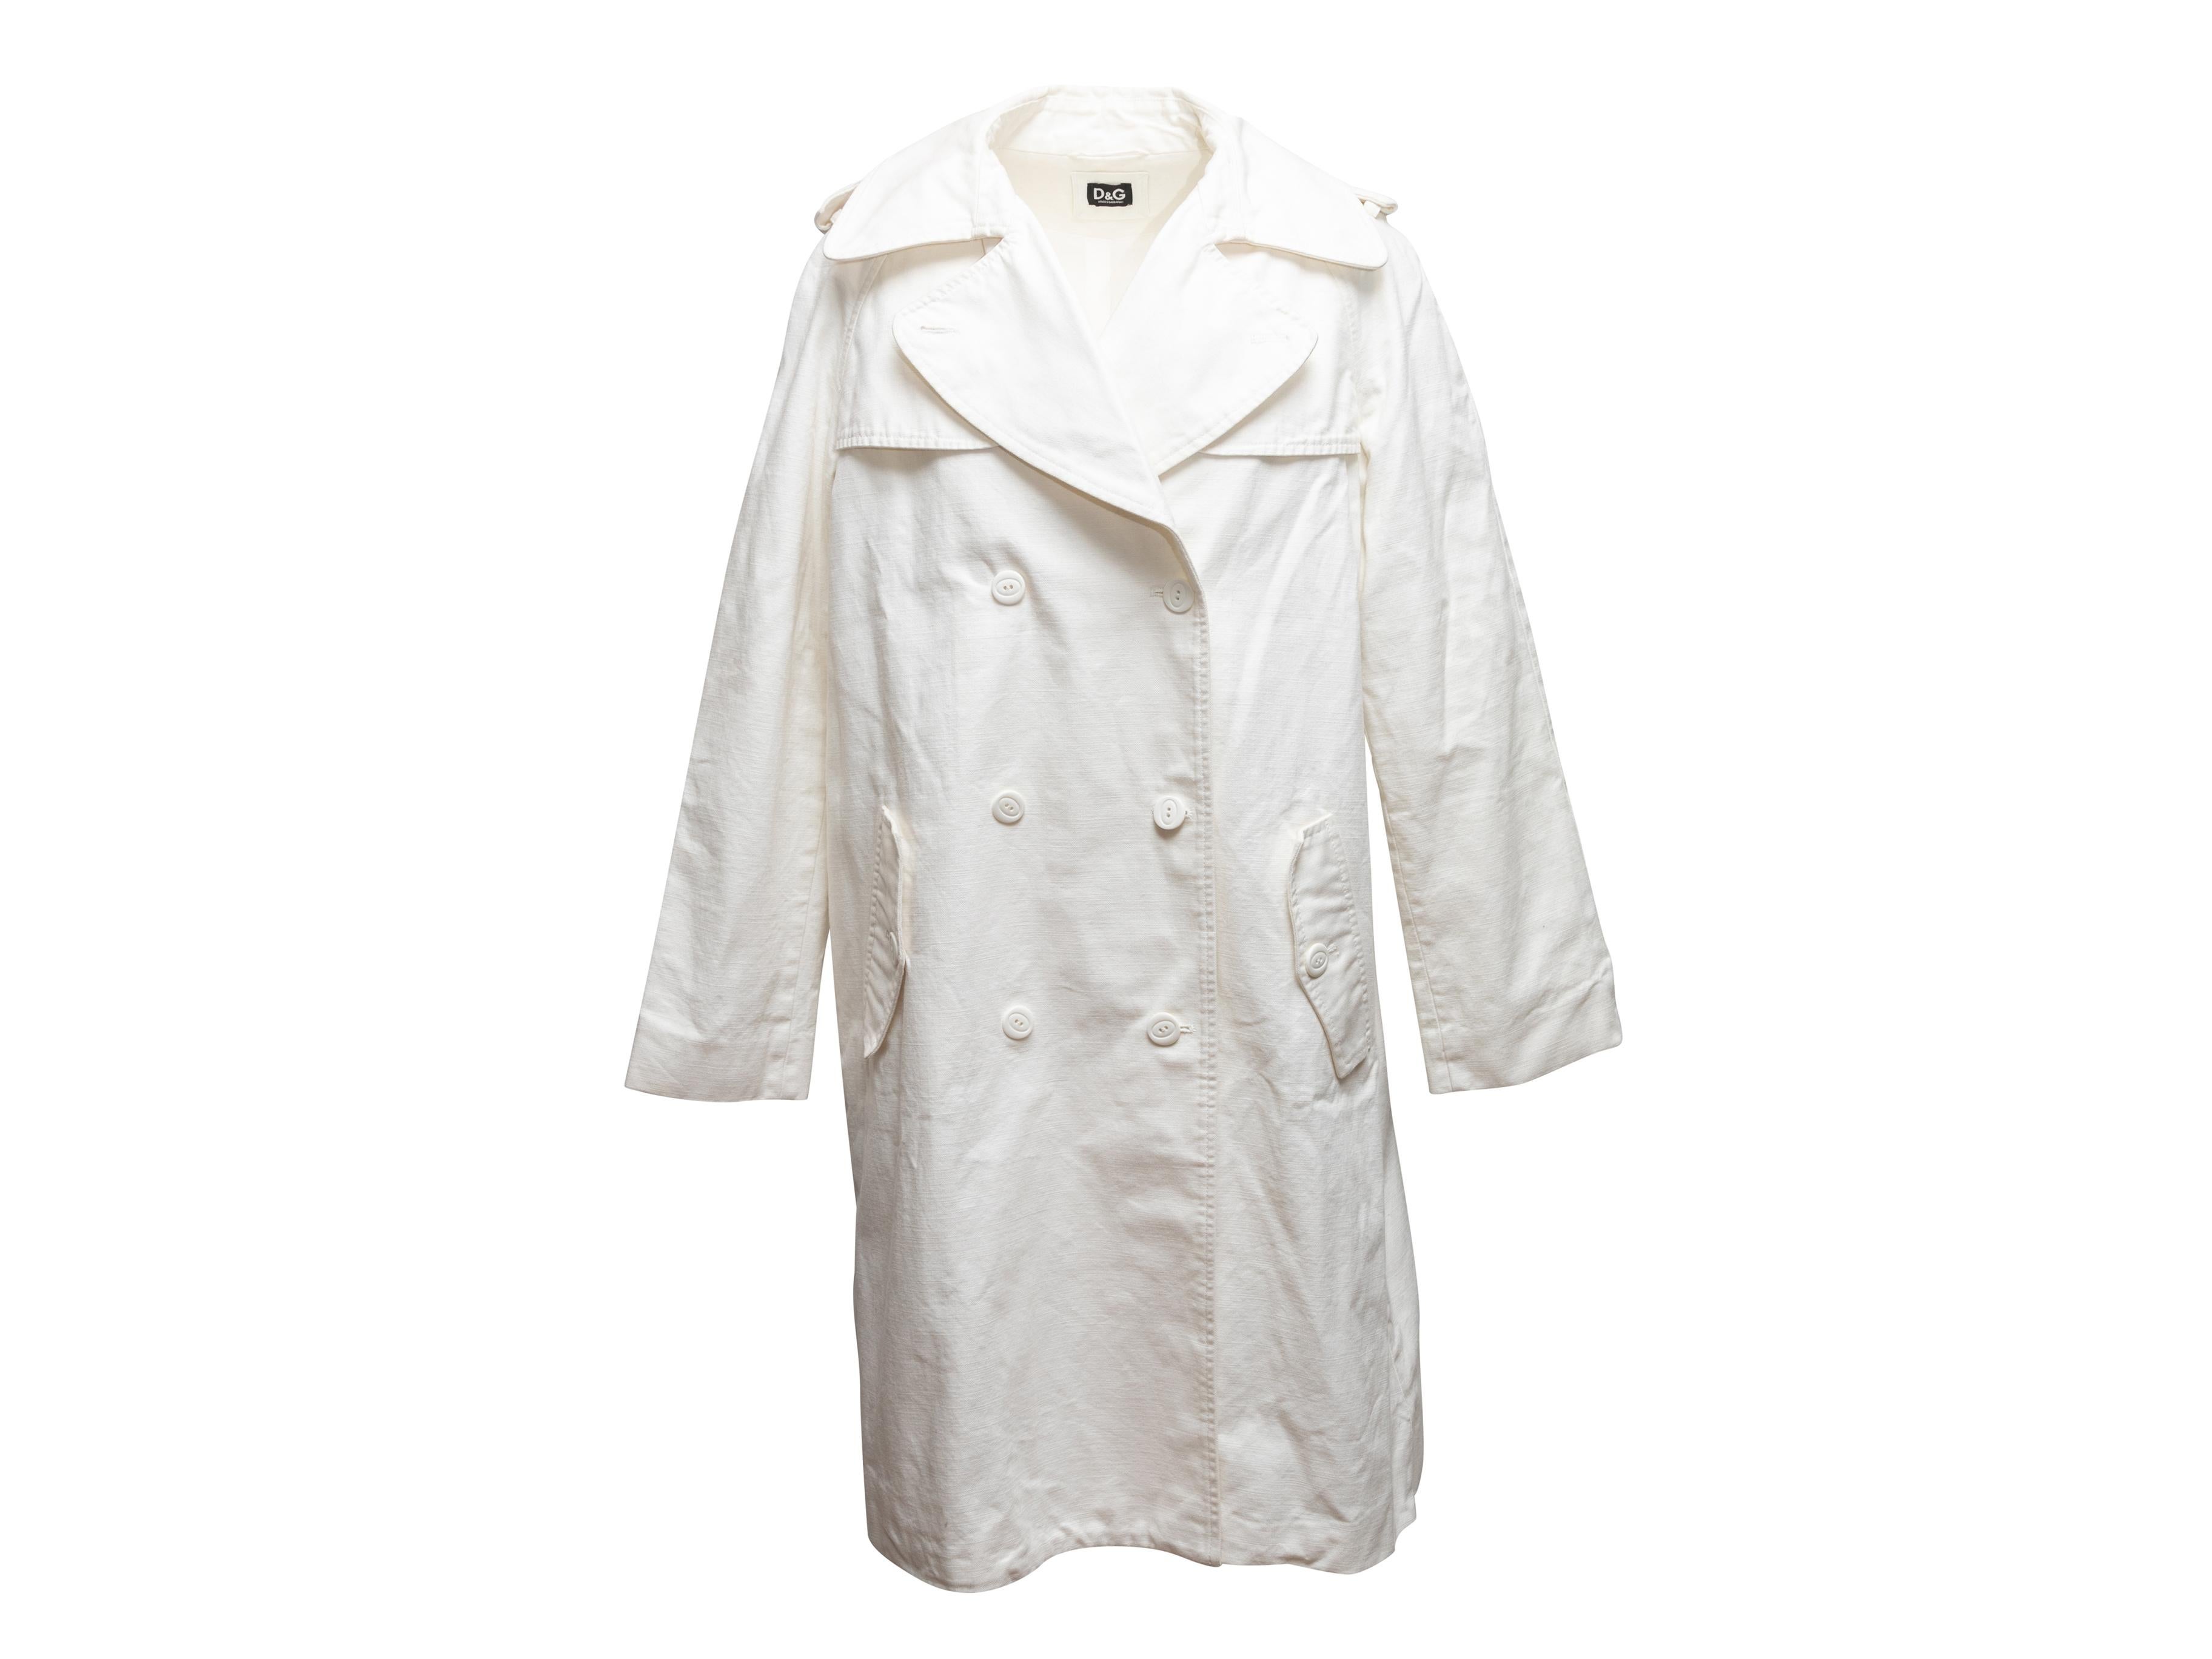 D&G Trench-coat blanc, taille IT 44